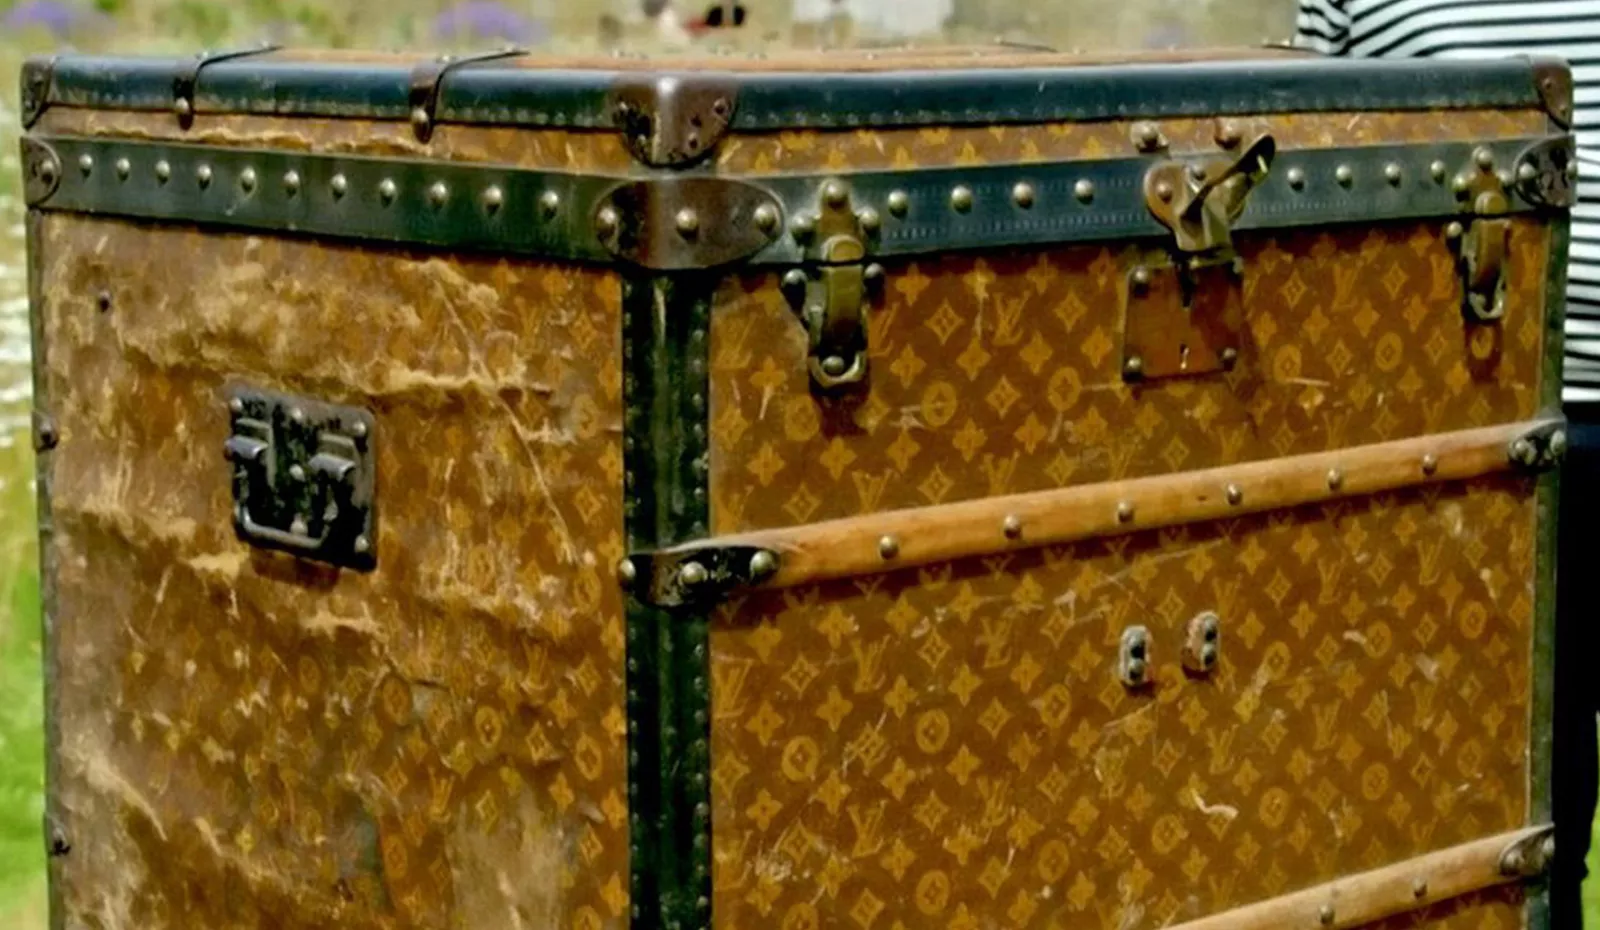 Louis Vuitton redesigns its archived trunks into vanity cases